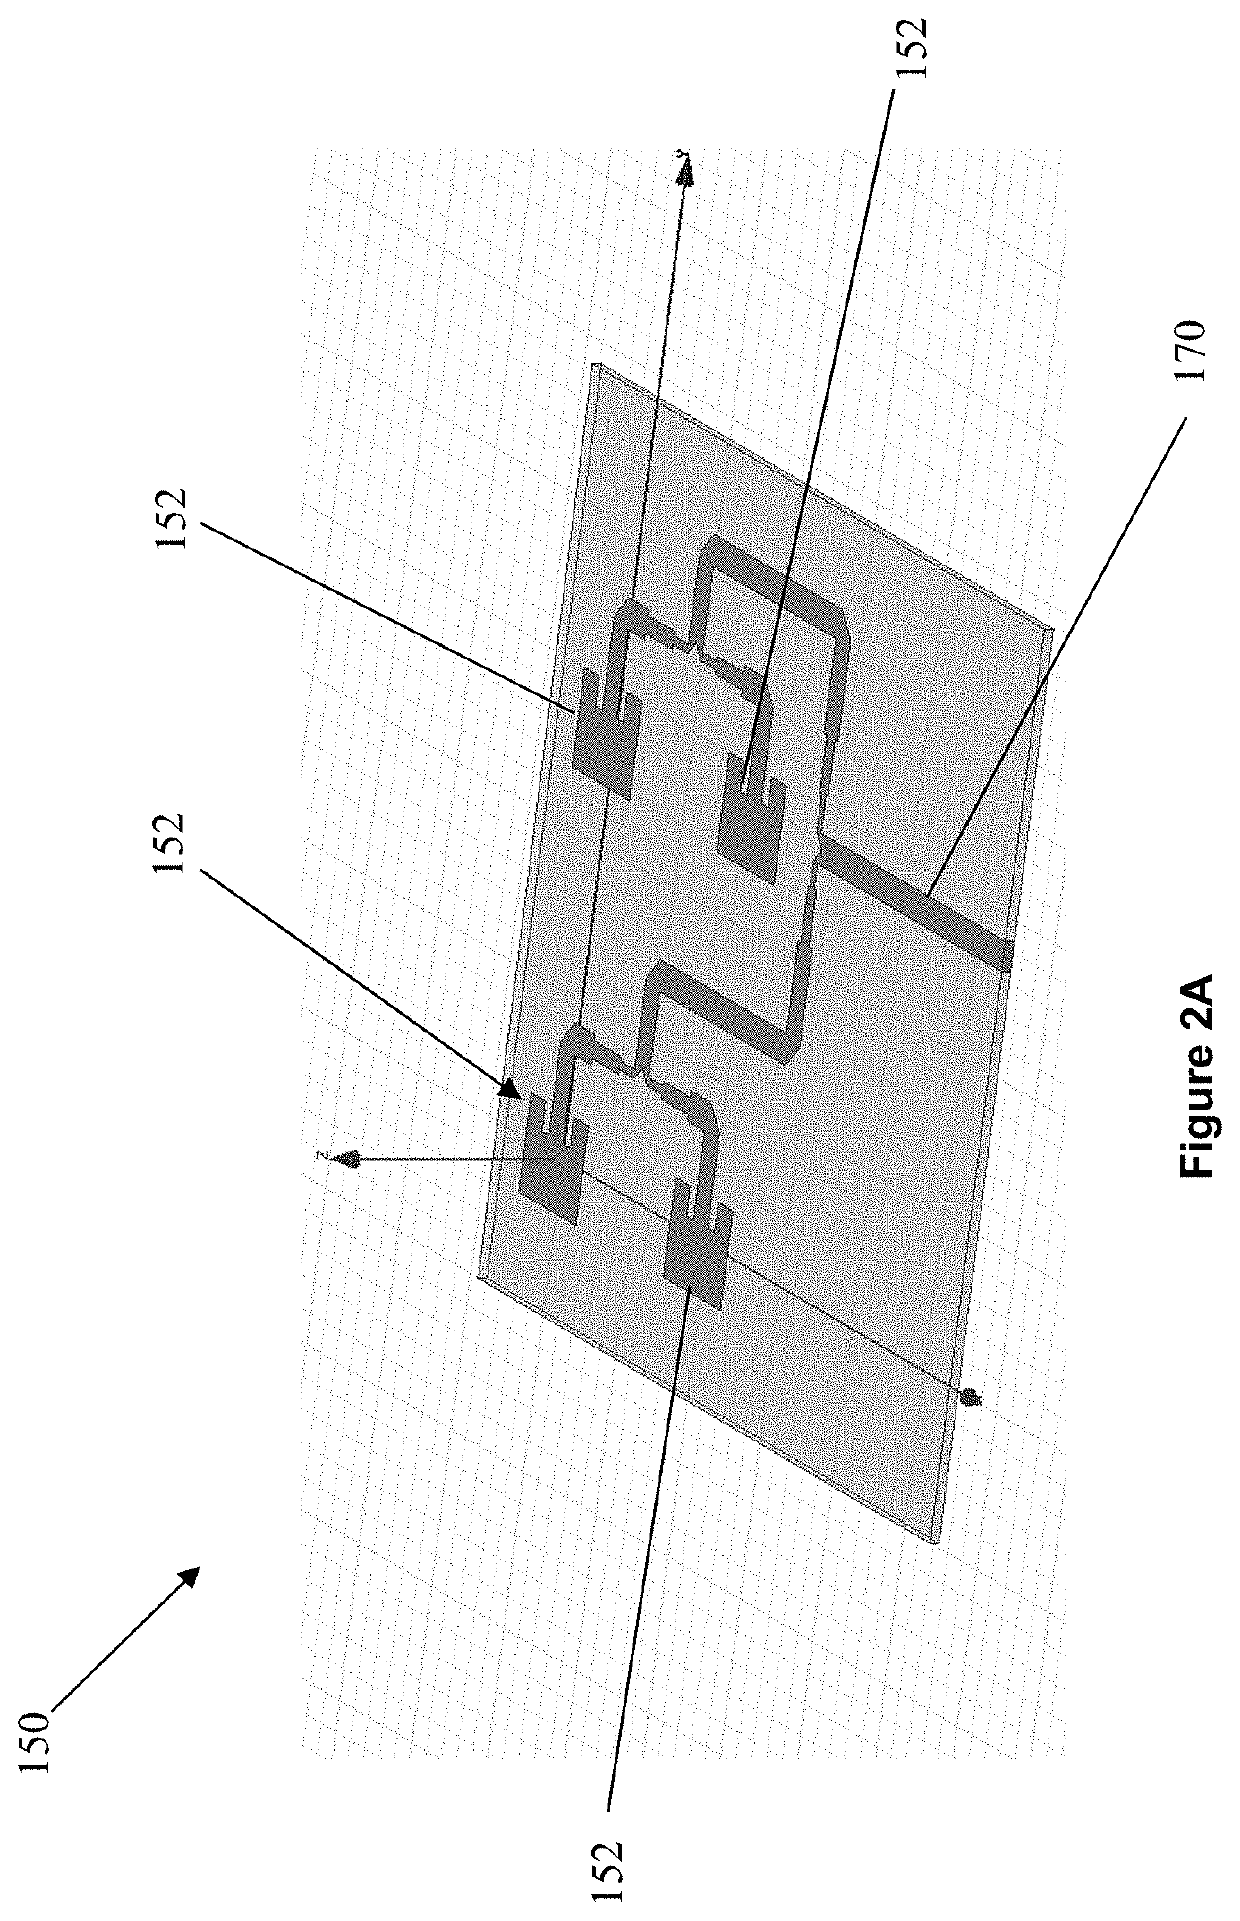 Non-invasive biological, chemical markers and tracers monitoring device in blood including glucose monitoring using adaptive RF circuits and antenna design